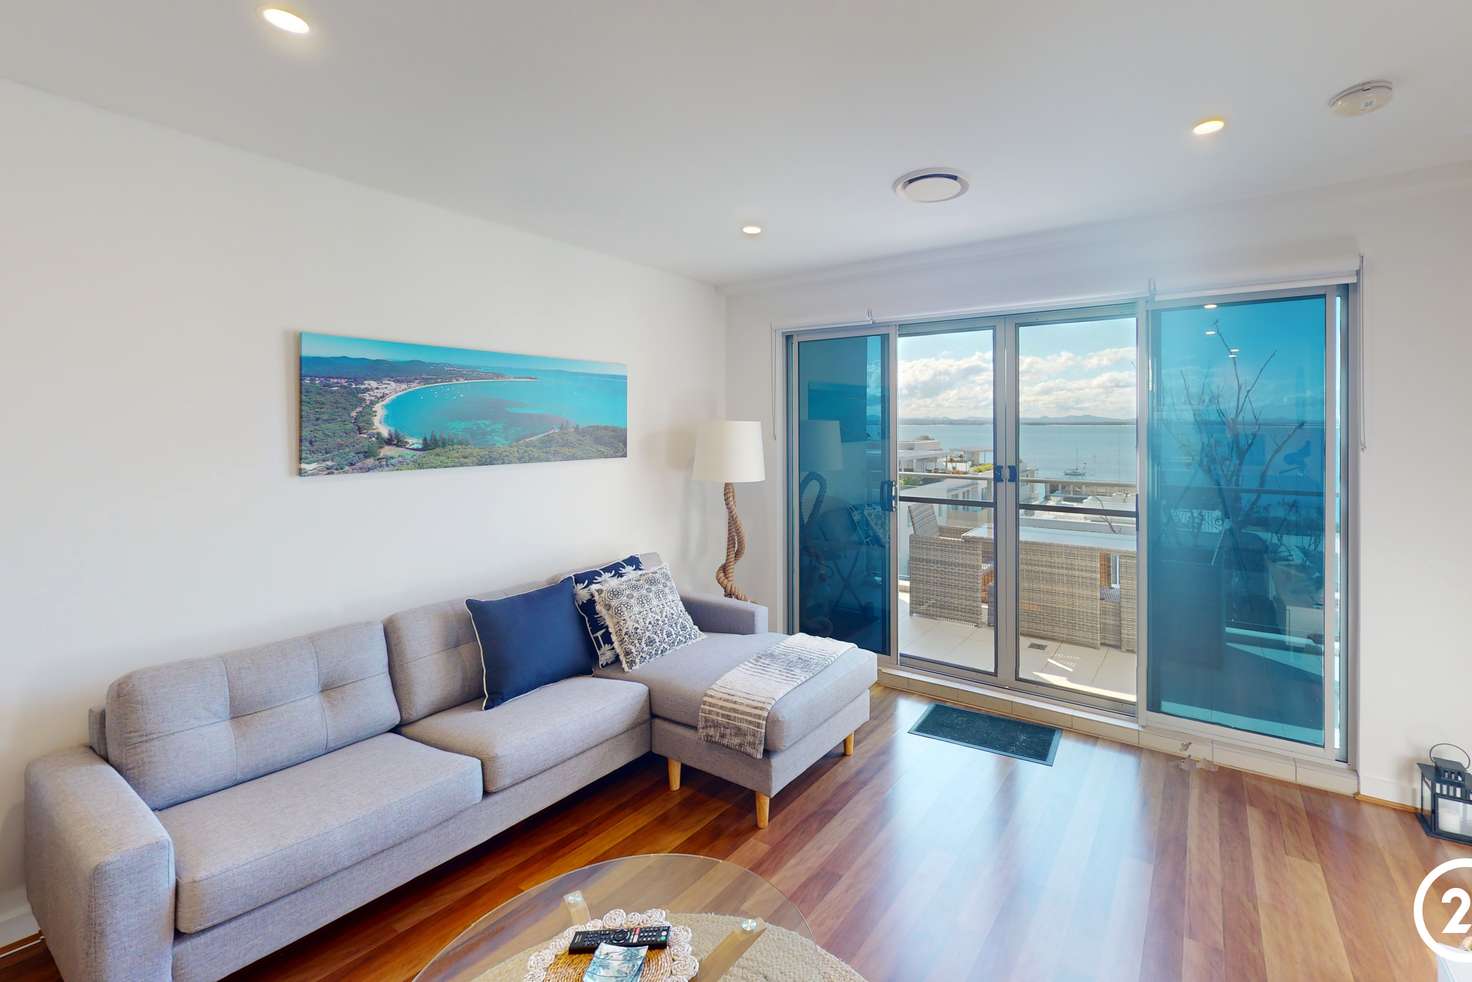 Main view of Homely apartment listing, 505/4-6 Bullecourt Street, Shoal Bay NSW 2315